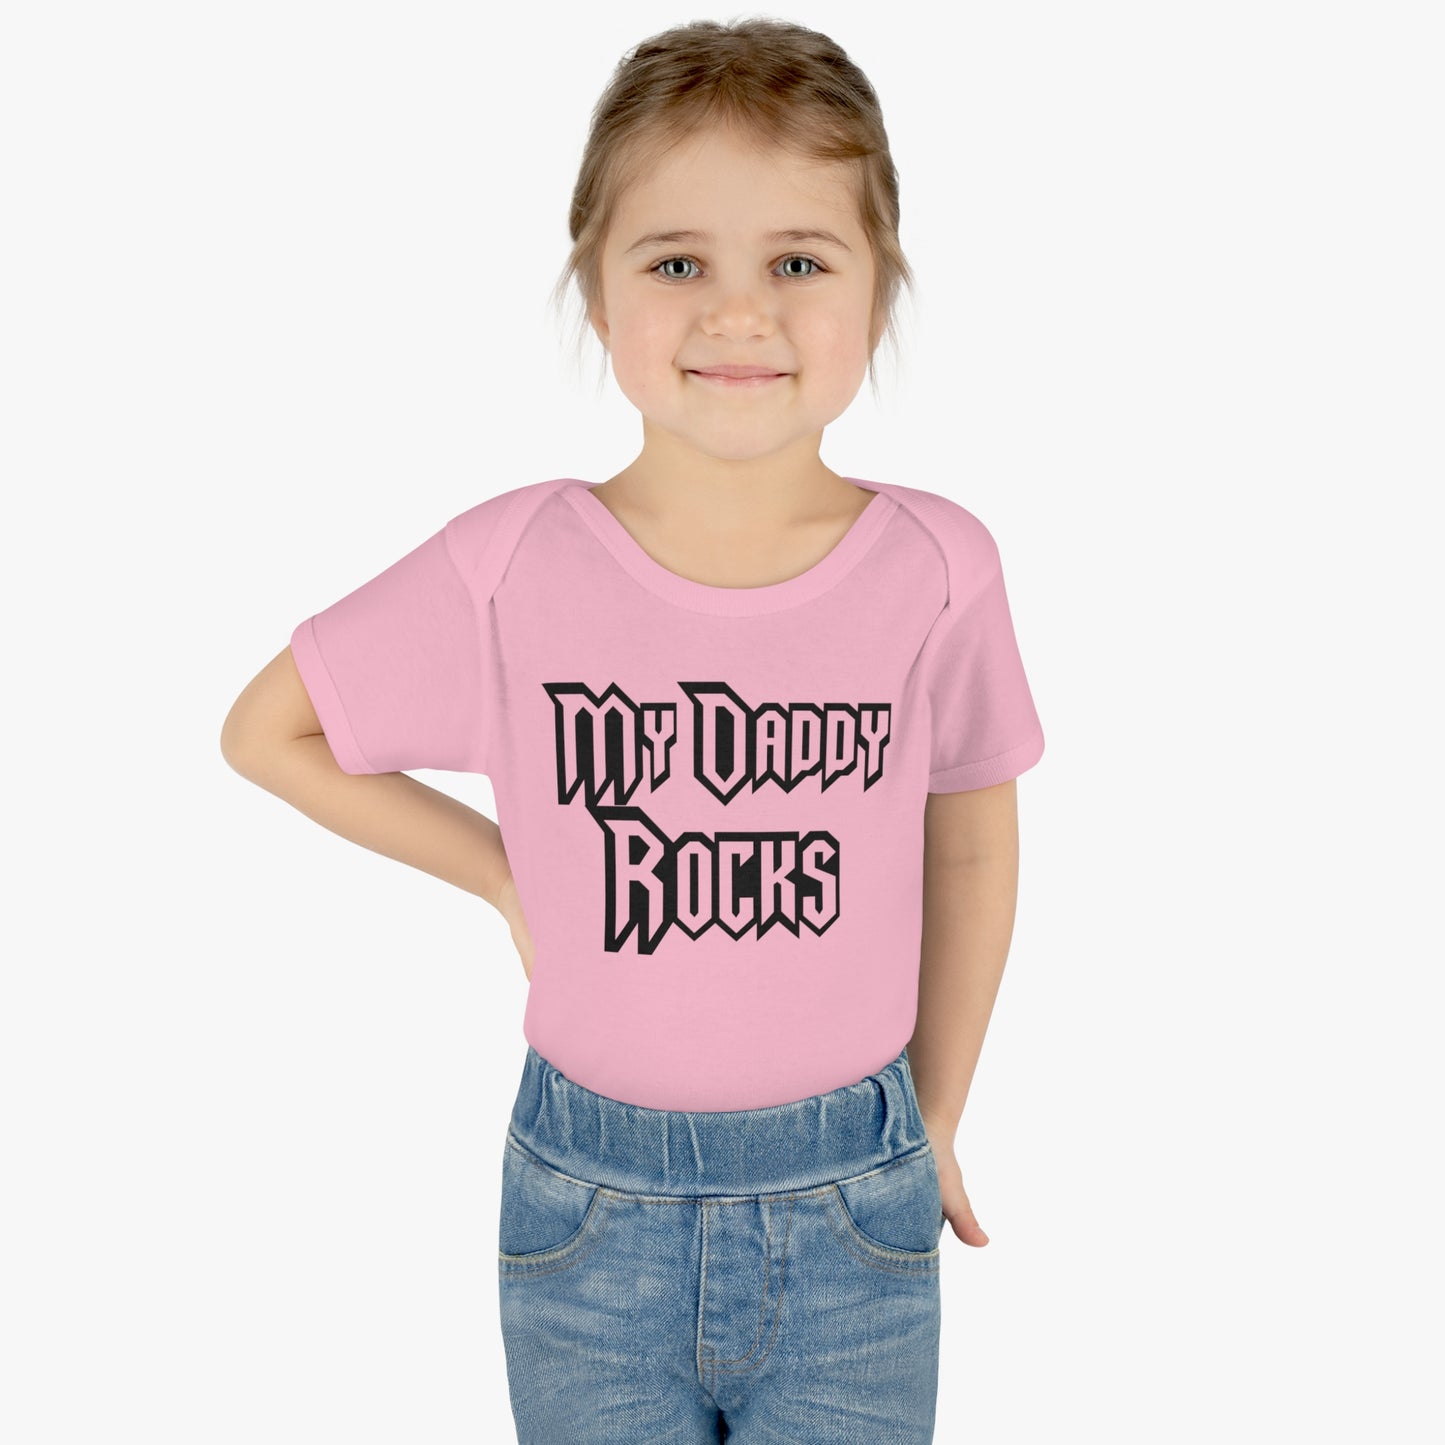 My Daddy Rocks Tee, Infant One Piece, Toddler Bodysuit, Rock and Roll T-Shirt for Baby, Heavy Metal T-Shirt, Musician T-Shirt